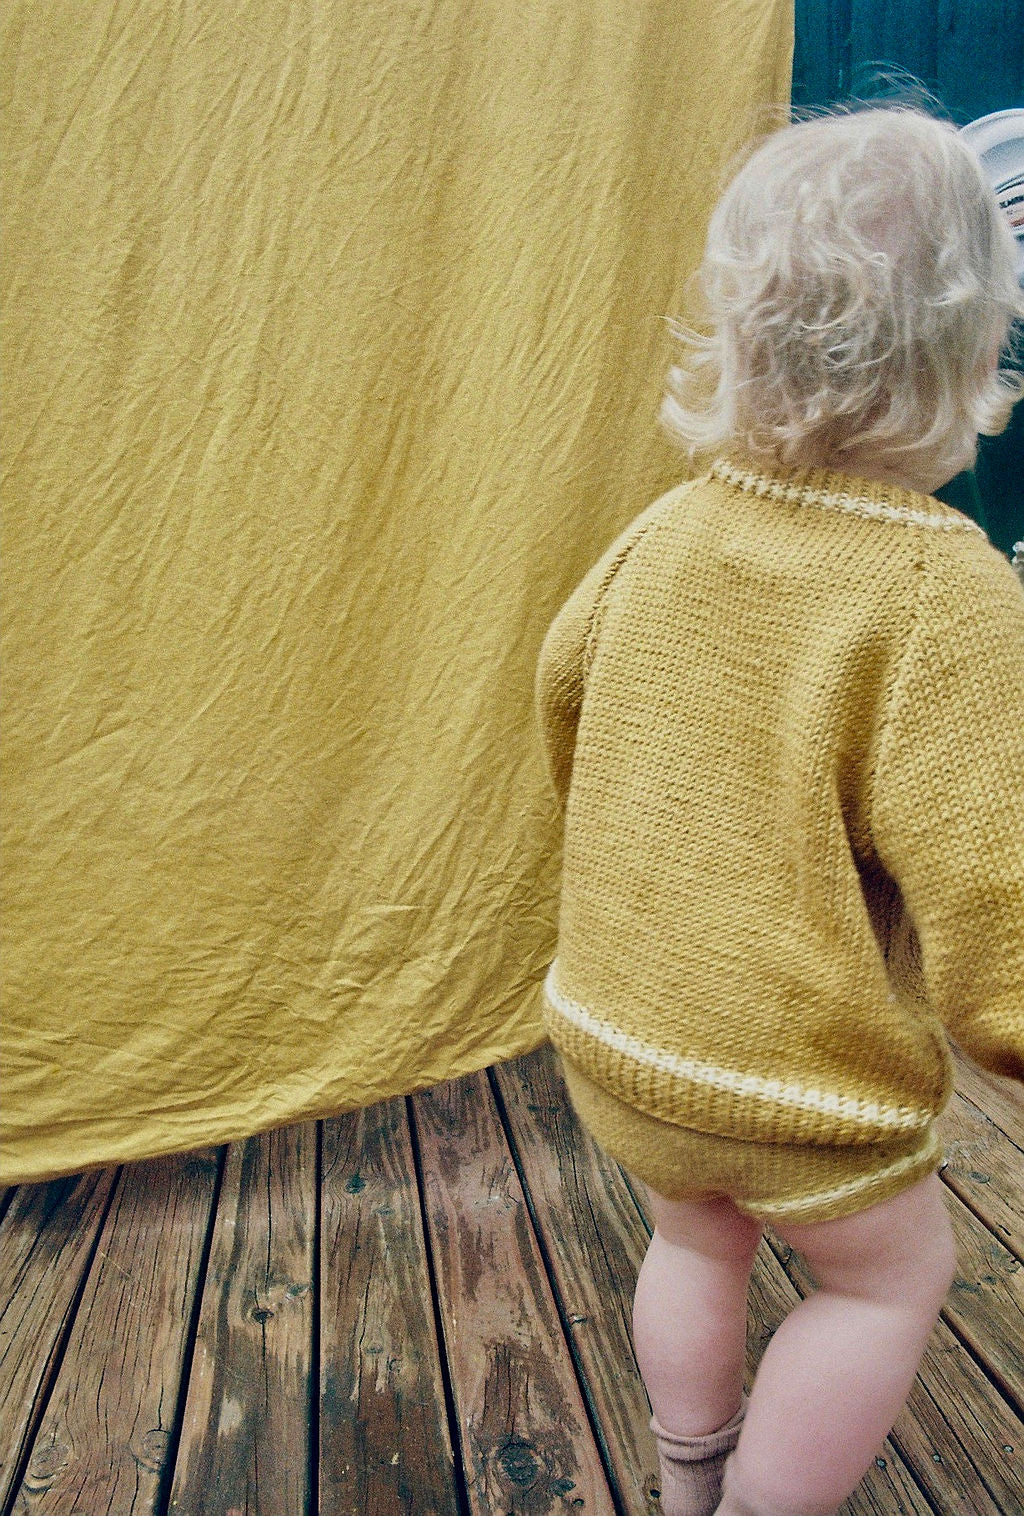 Born West - Hand Knitted Cotton Bloomers - Golden Glow